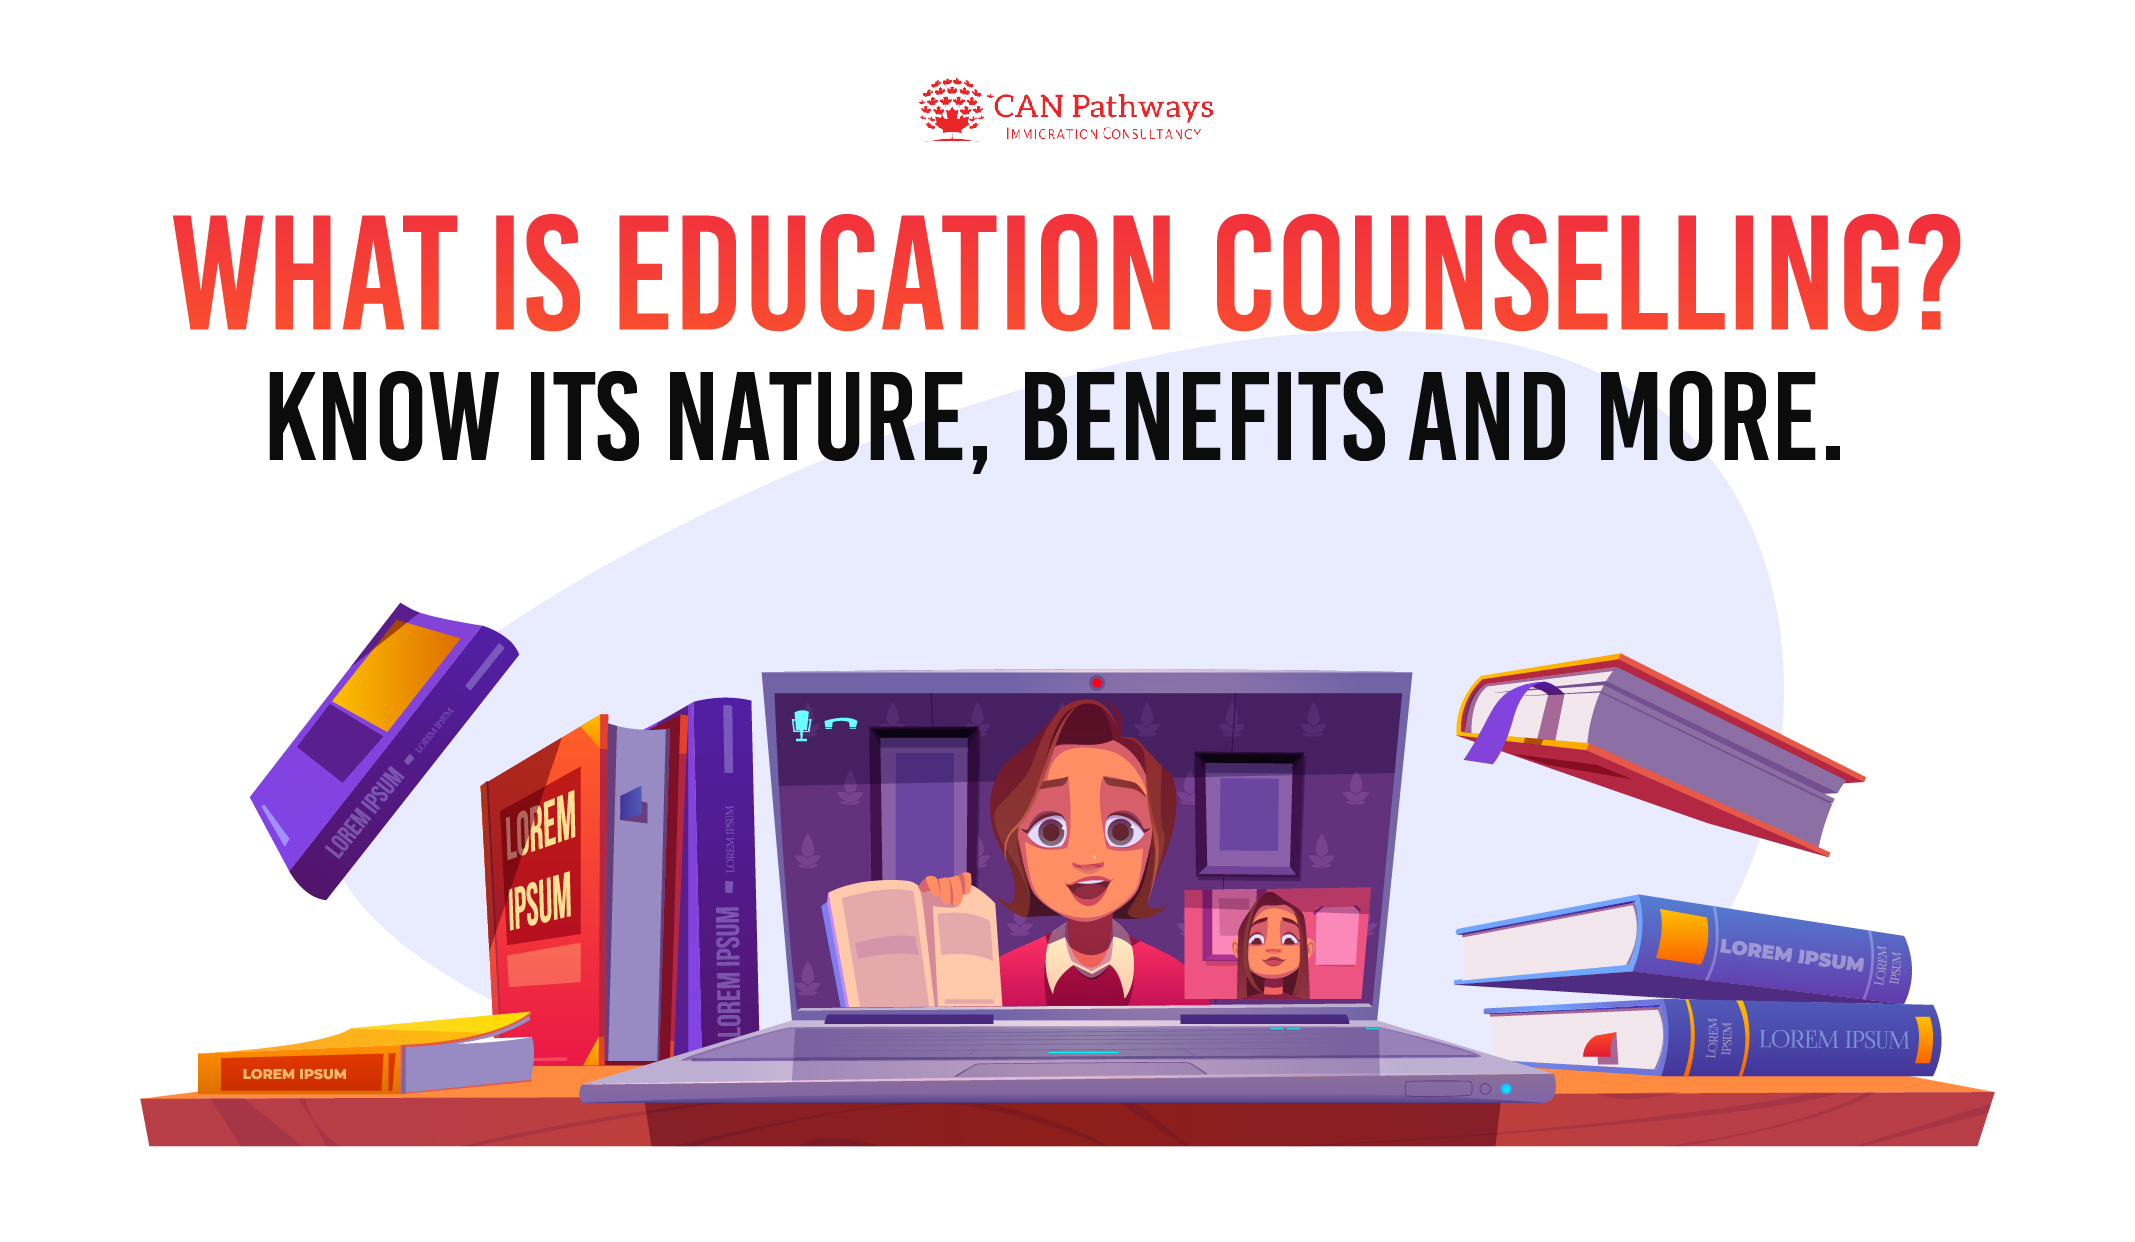 Education Counselling